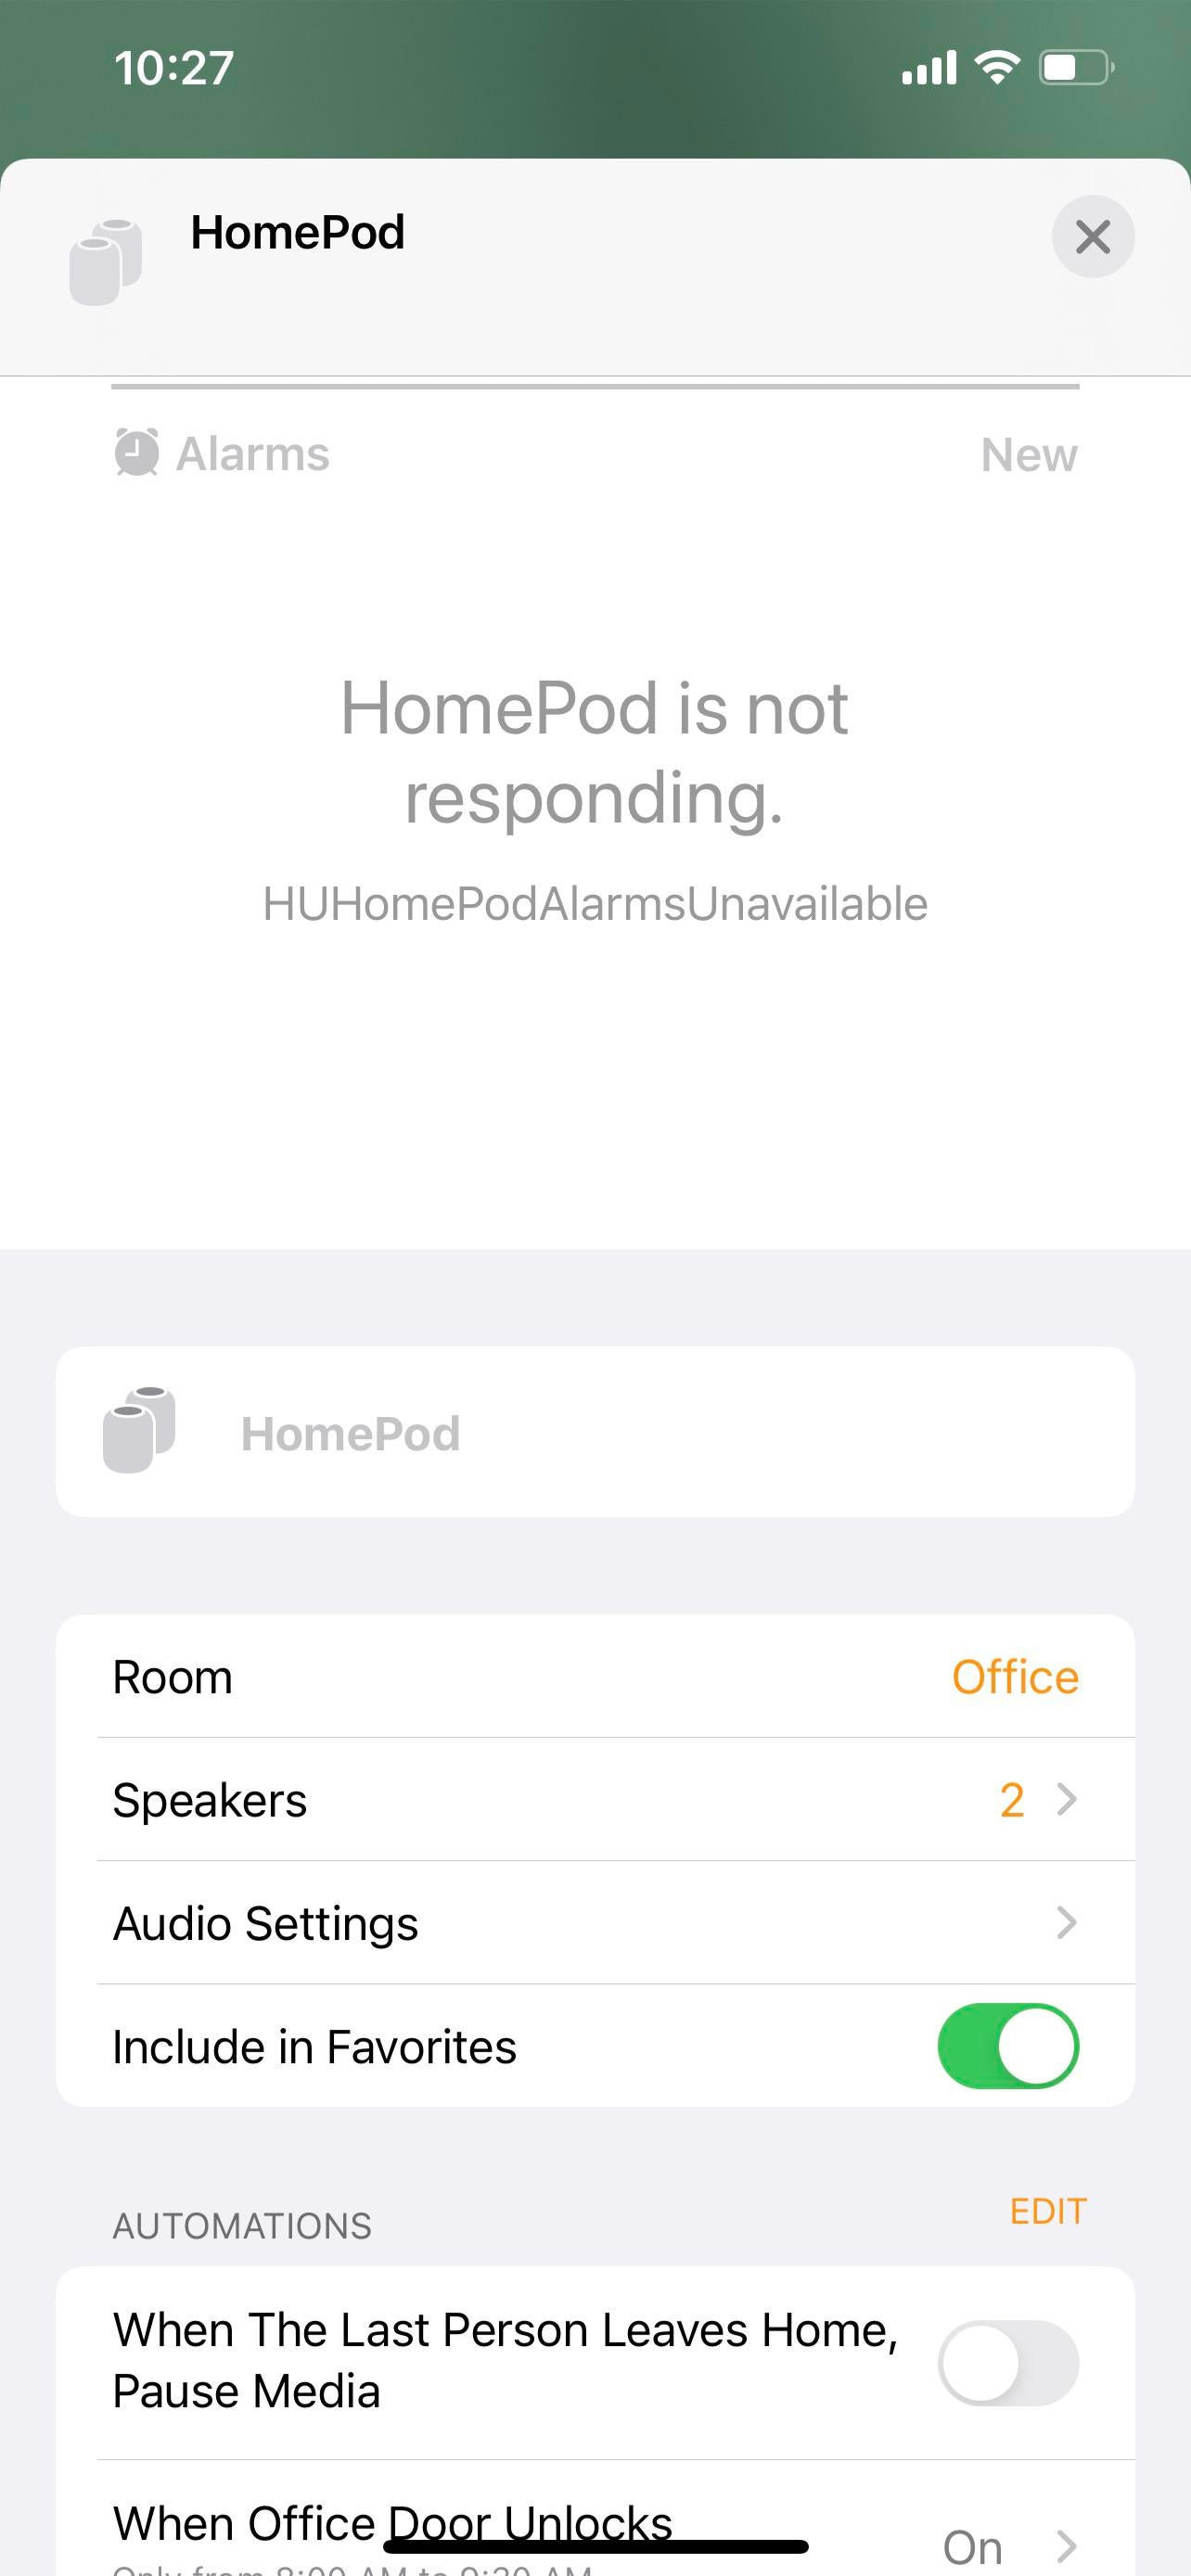 Homepod connected to 5ghz The huge unanswered left or right